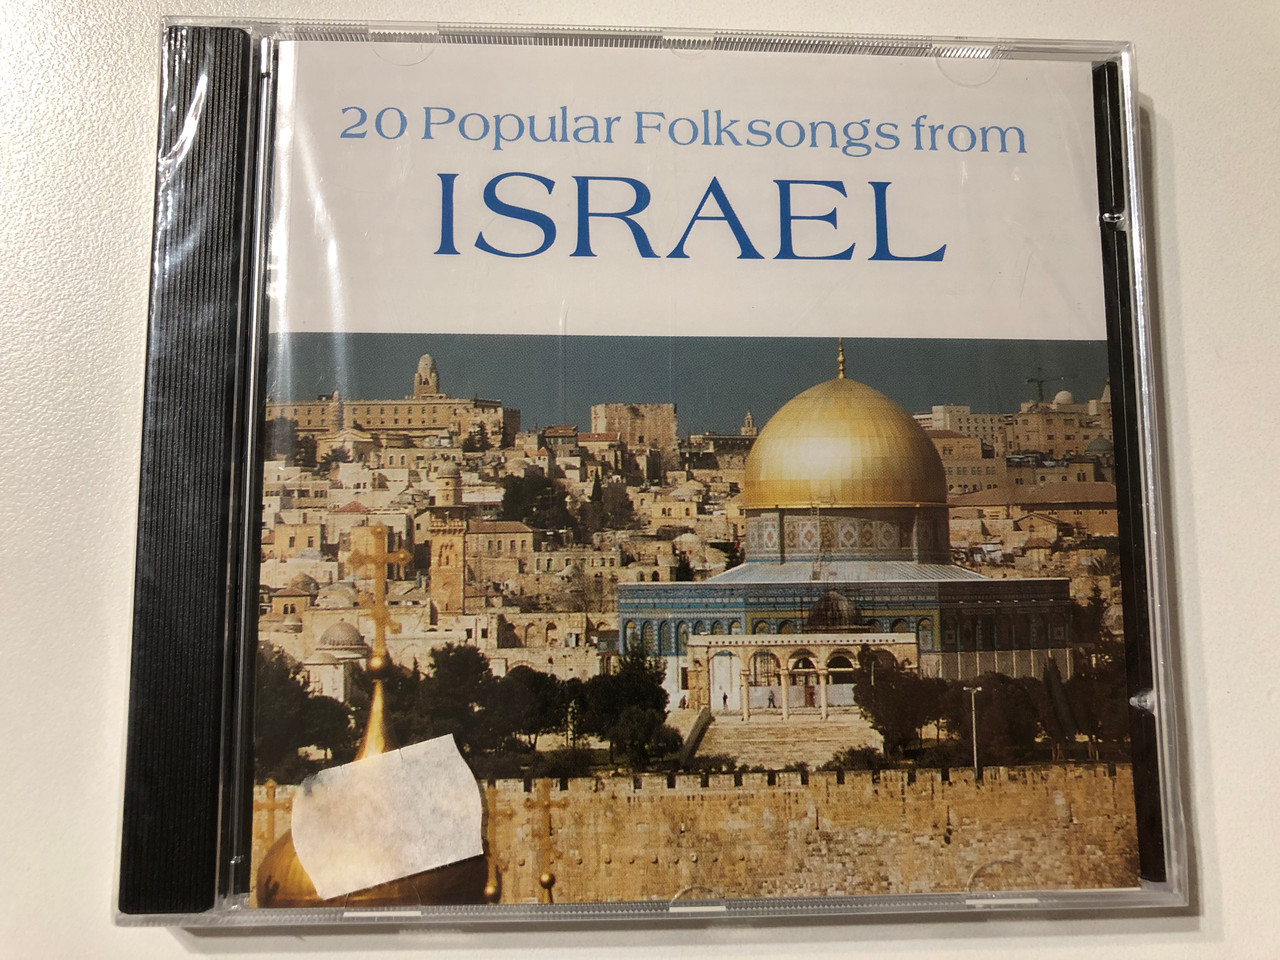 https://cdn11.bigcommerce.com/s-62bdpkt7pb/products/0/images/331867/20_Popular_Folksongs_from_Israel_ARC_Music_Audio_CD_1995_EUCD_1298_1__04892.1713953517.1280.1280.JPG?c=2